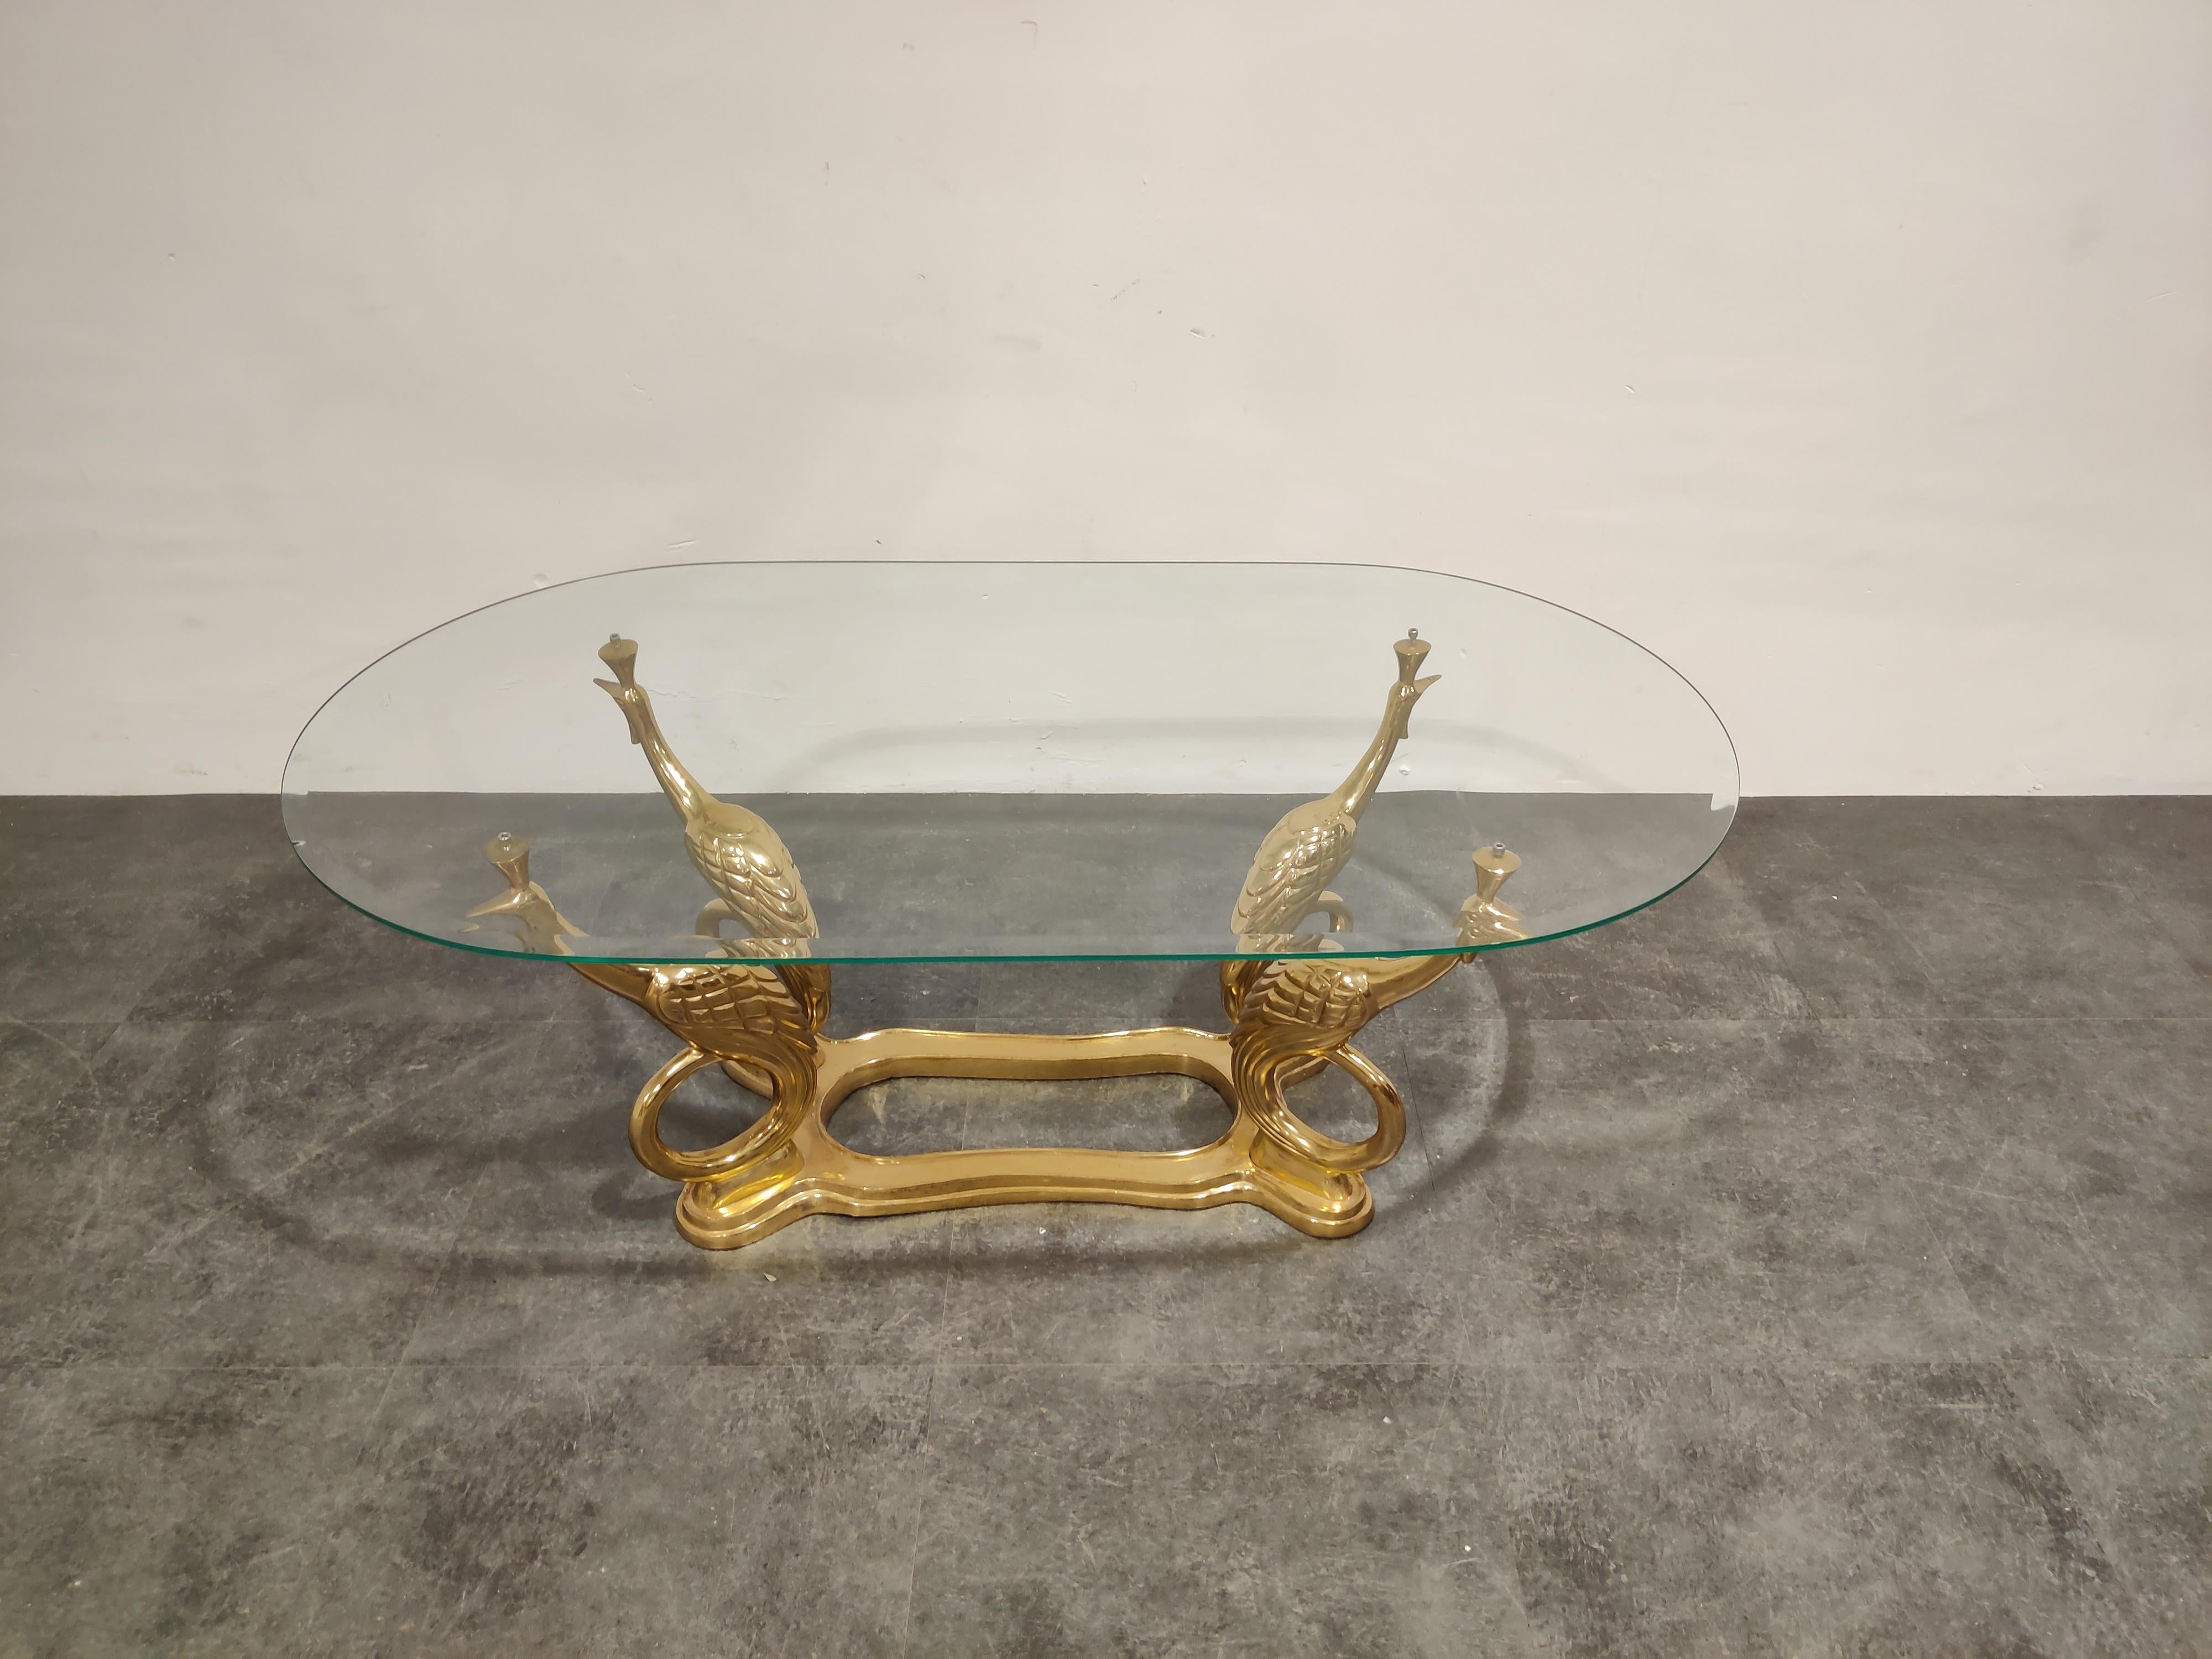 Sculptural brass peacock coffee table with a clear oval beveled glass top.

Great eye catching coffee table.

1970s - Belgium

Good overall condition with a small chip to the glass.

Dimensions:
Height 45cm/17.71